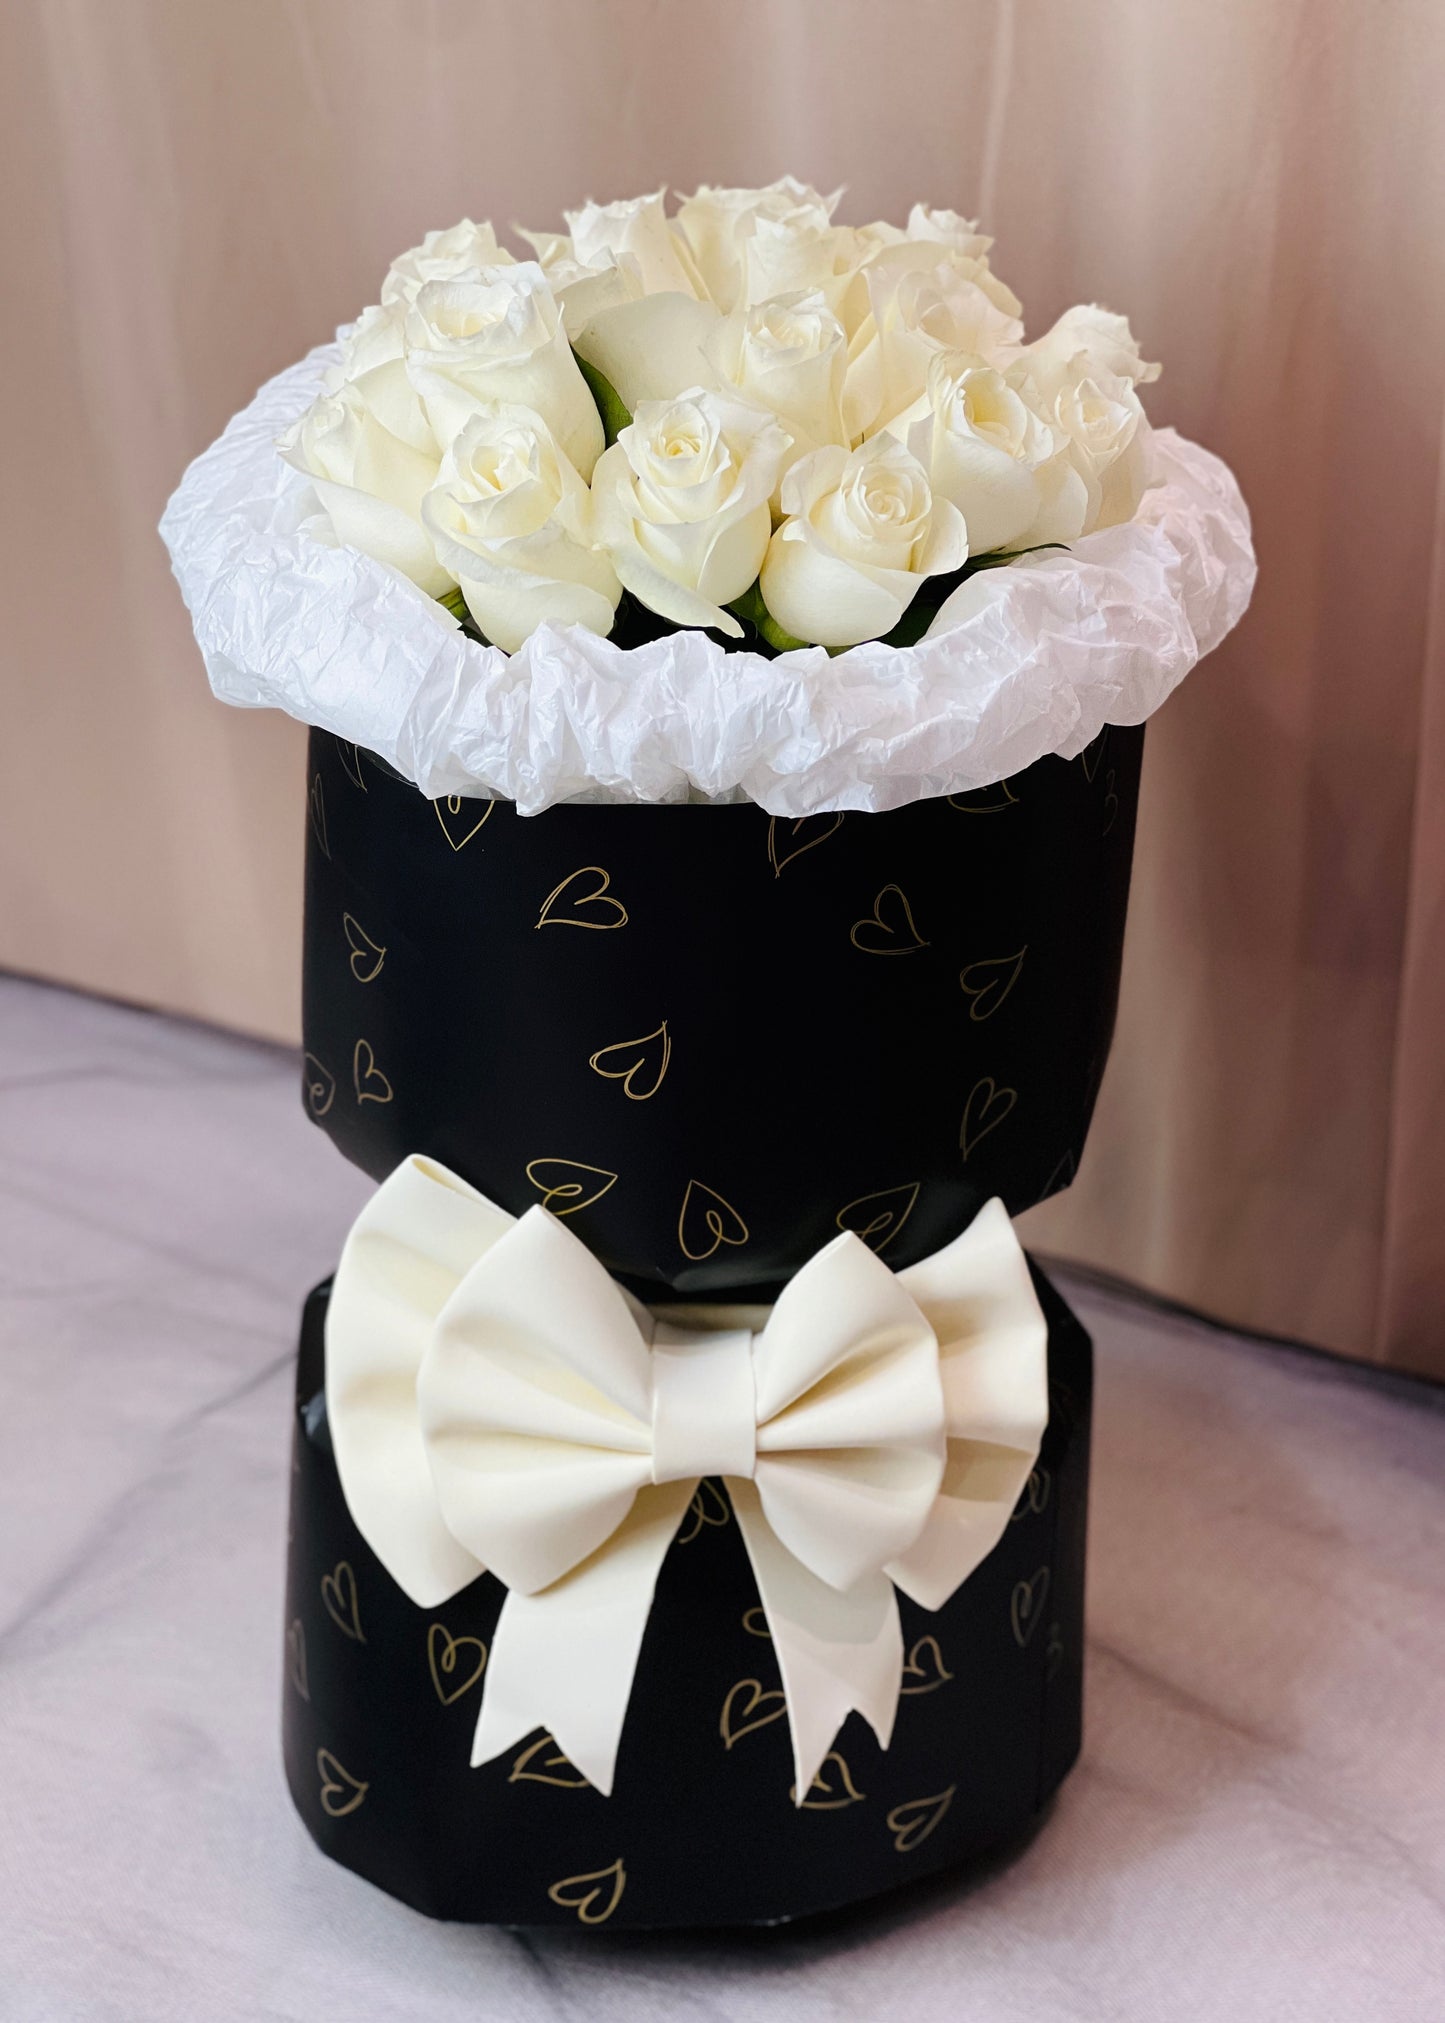 Raven White Roses | Round Rose Bouquet